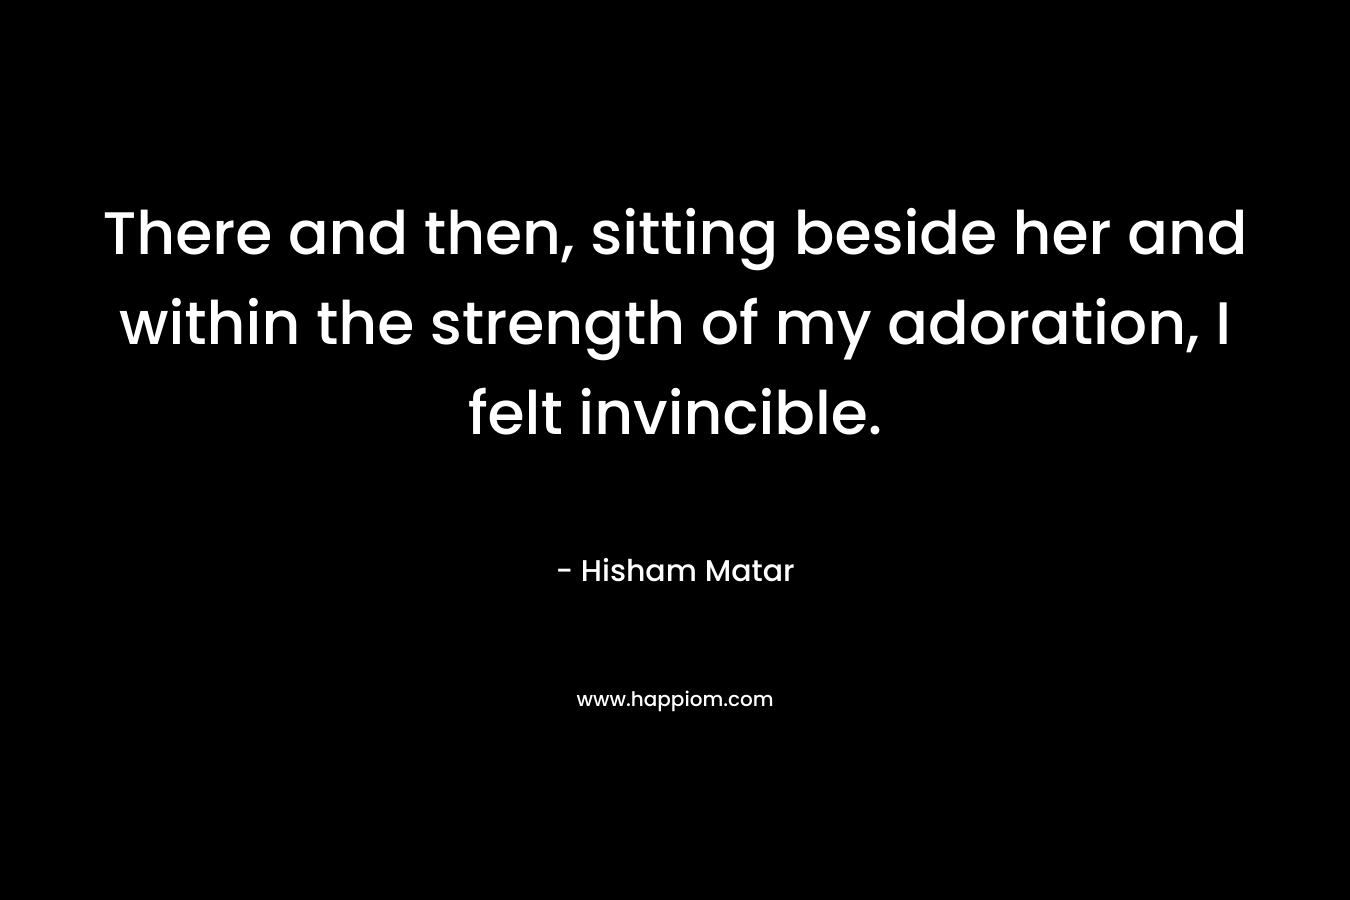 There and then, sitting beside her and within the strength of my adoration, I felt invincible. – Hisham Matar